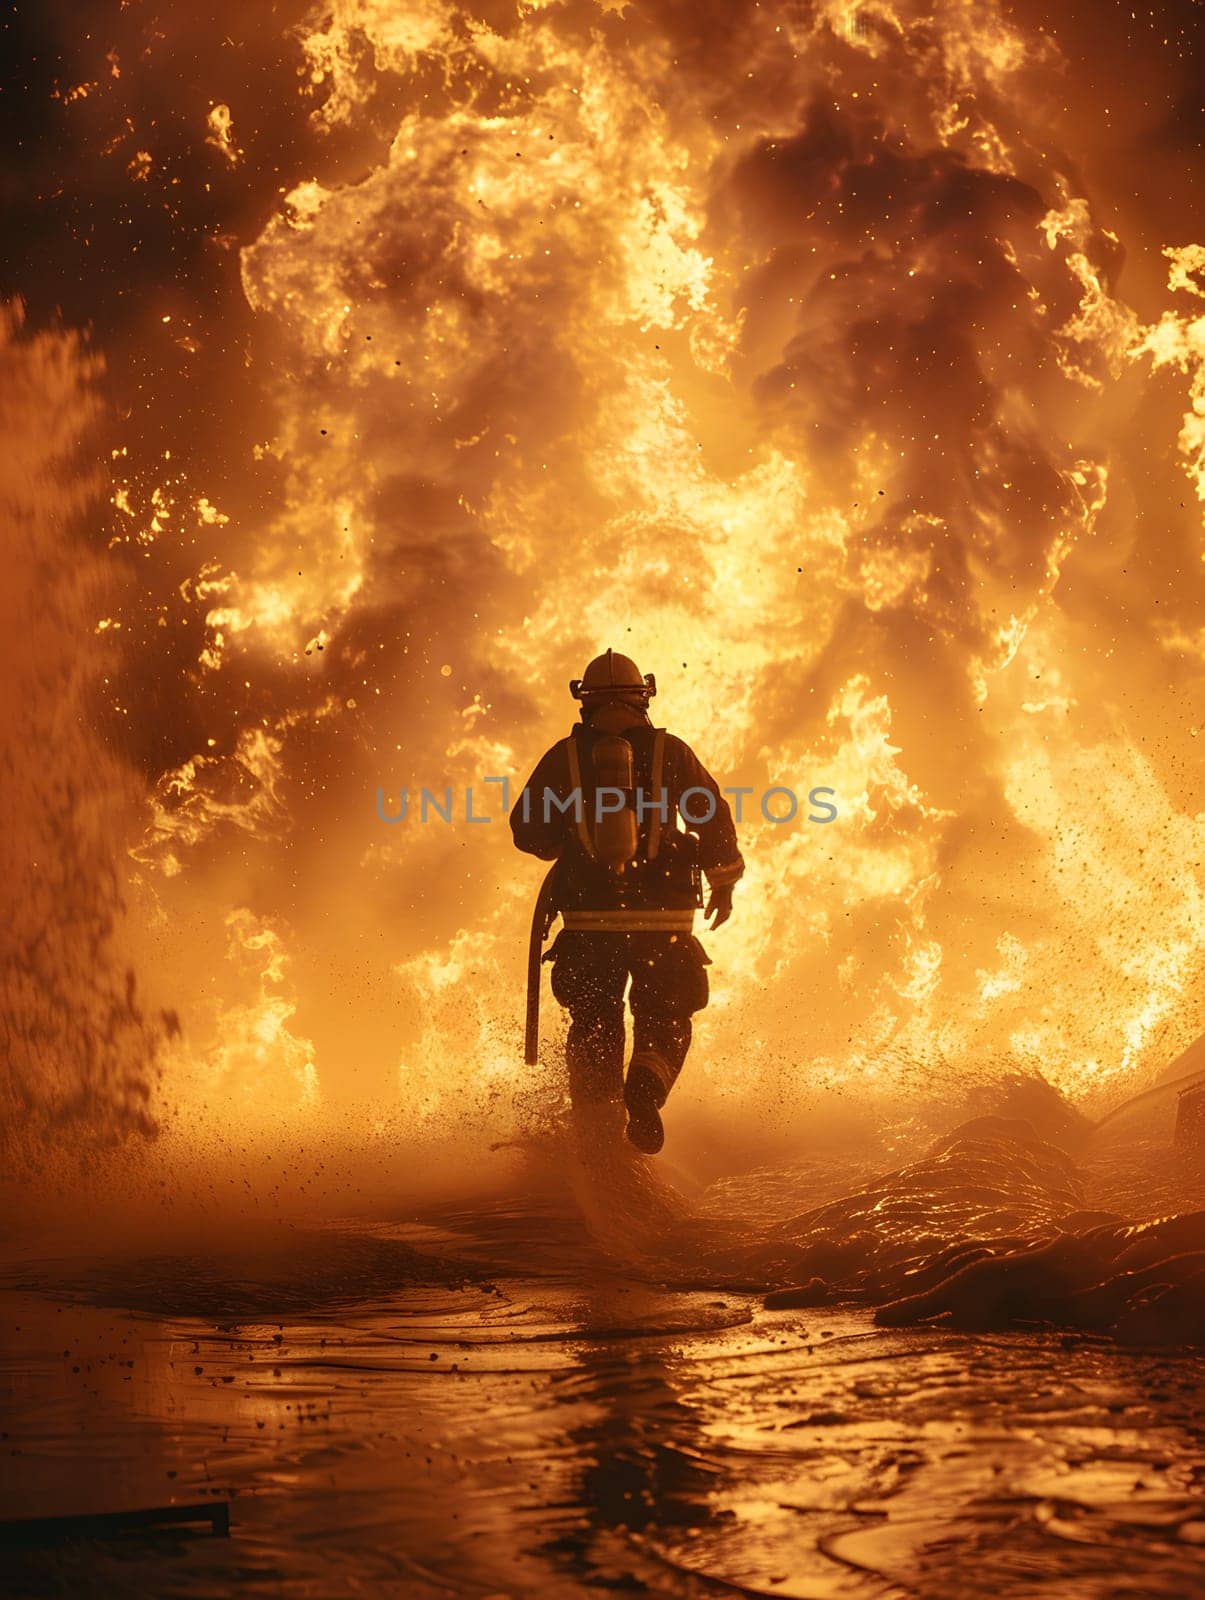 A fireman races through the blazing inferno, using water to extinguish the flames. The heat of the fire contrasts with the cool sky and lake in the horizon